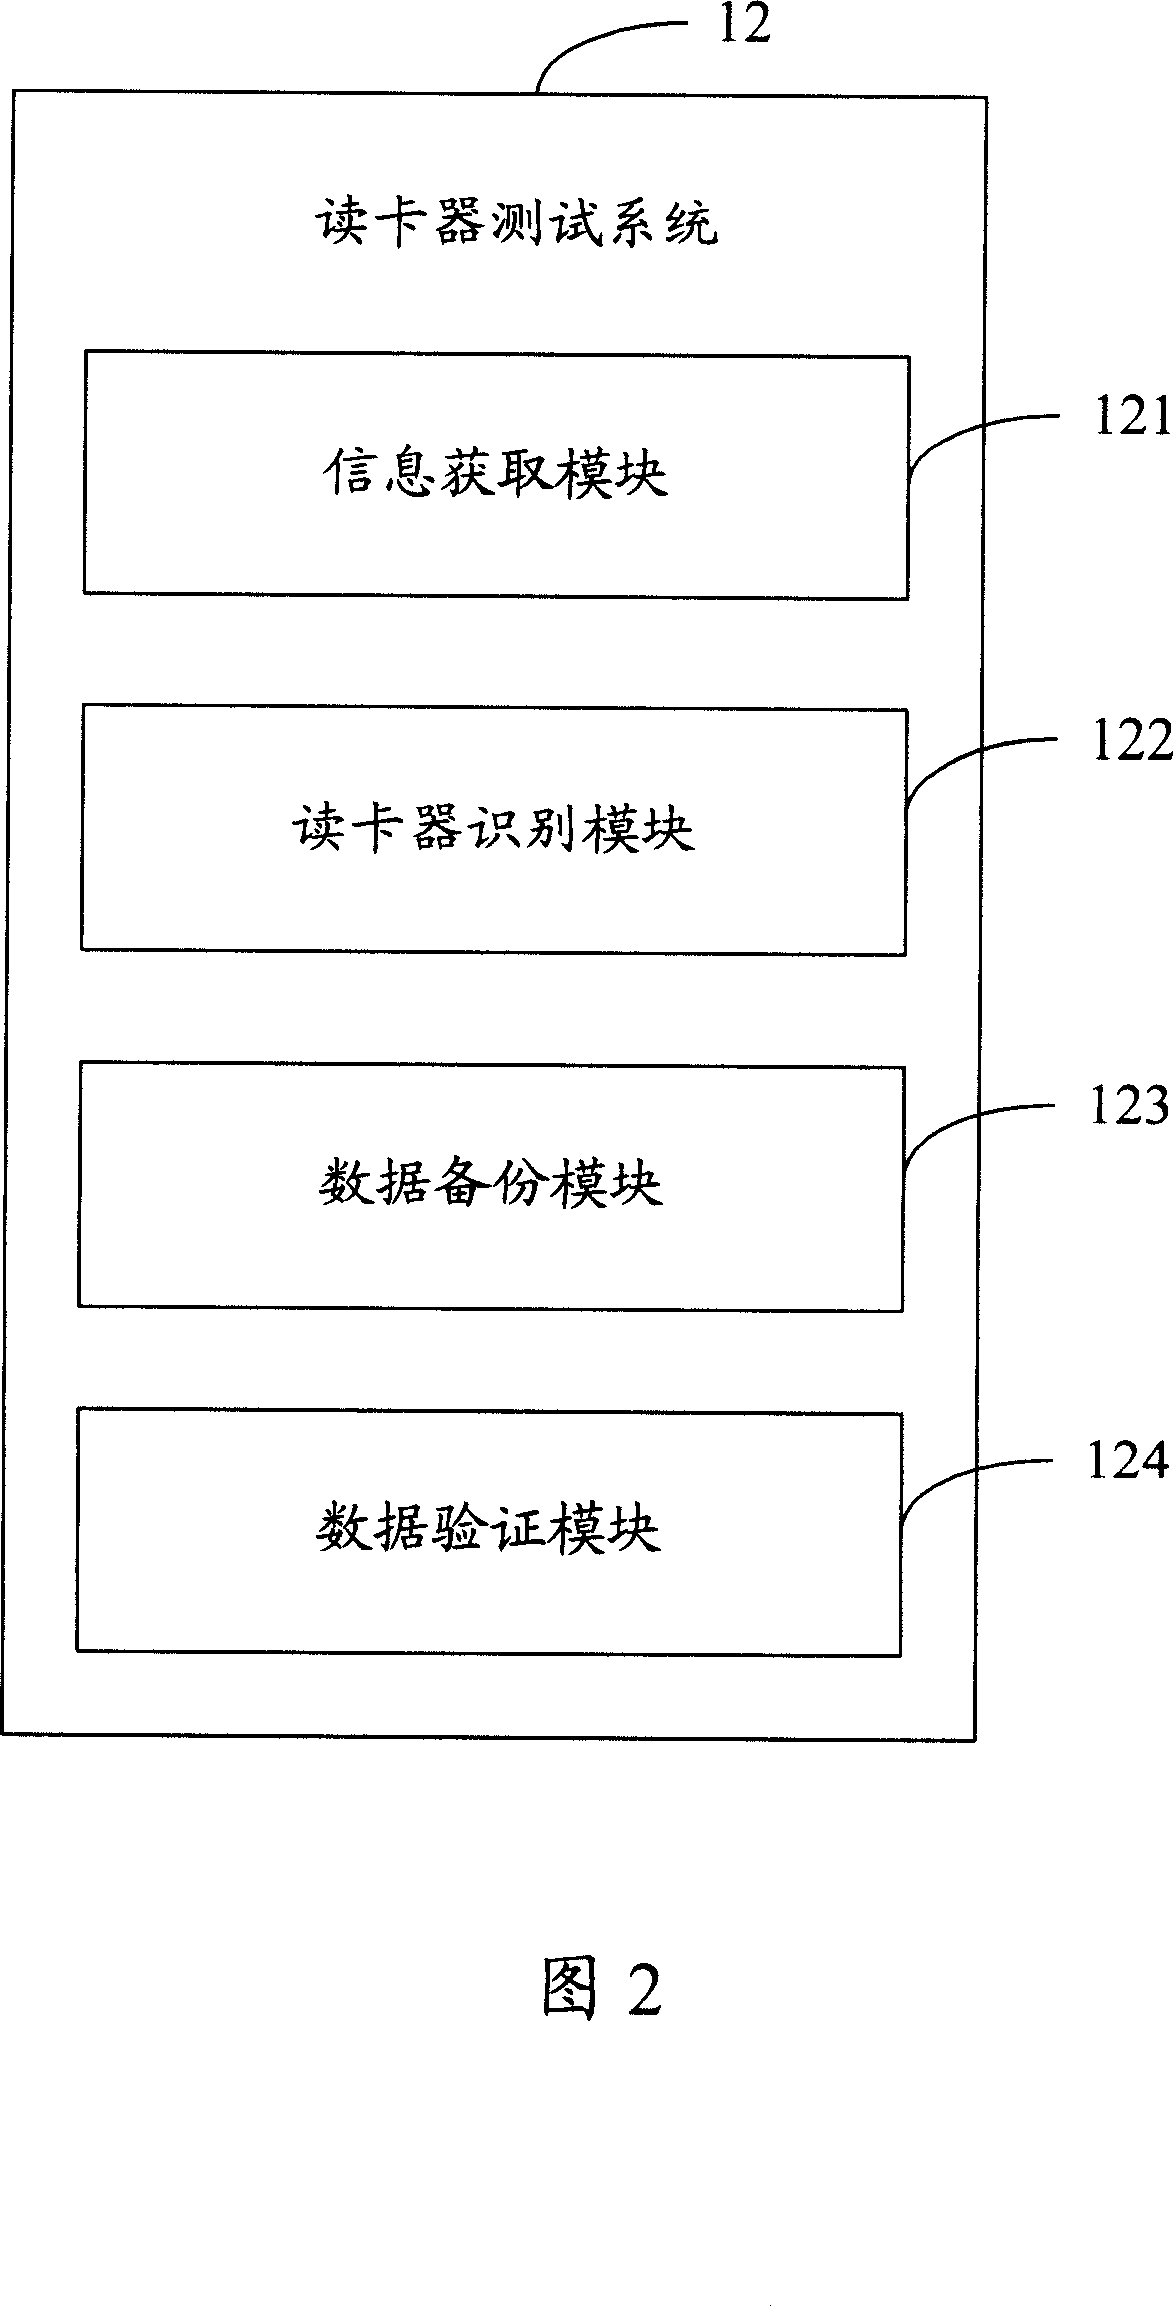 Card reader testing system and method